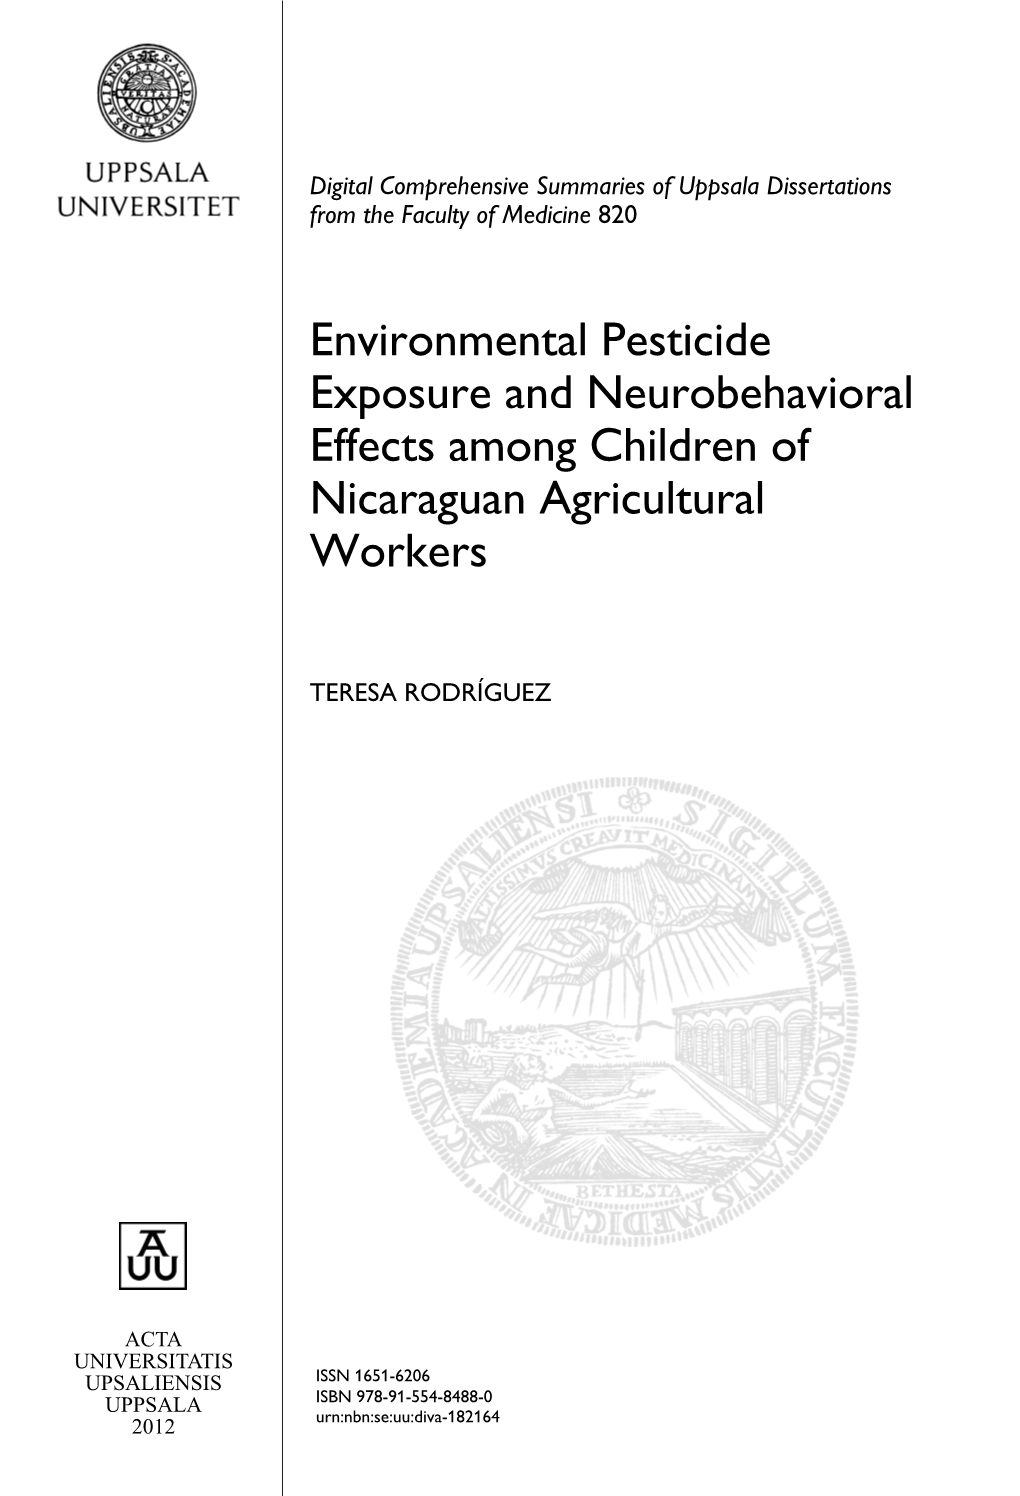 Environmental Pesticide Exposure and Neurobehavioral Effects Among Children of Nicaraguan Agricultural Workers